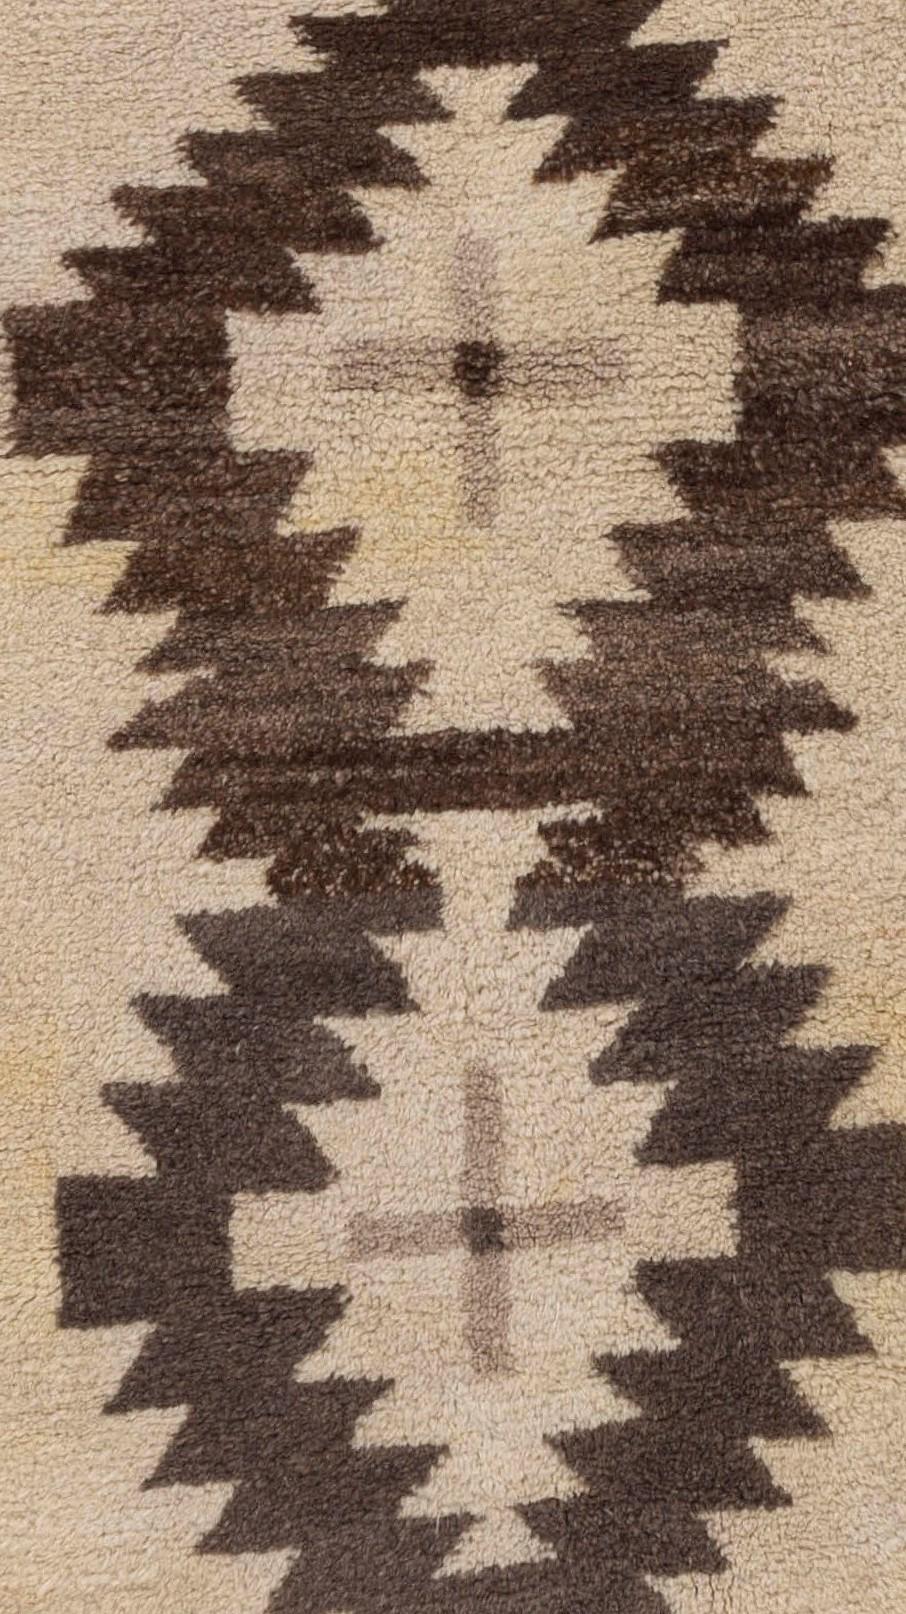 Hand-Knotted 2.7x7.3 ft Vintage Tulu Runner Rug. 100% Natural Wool. Custom Options Available For Sale